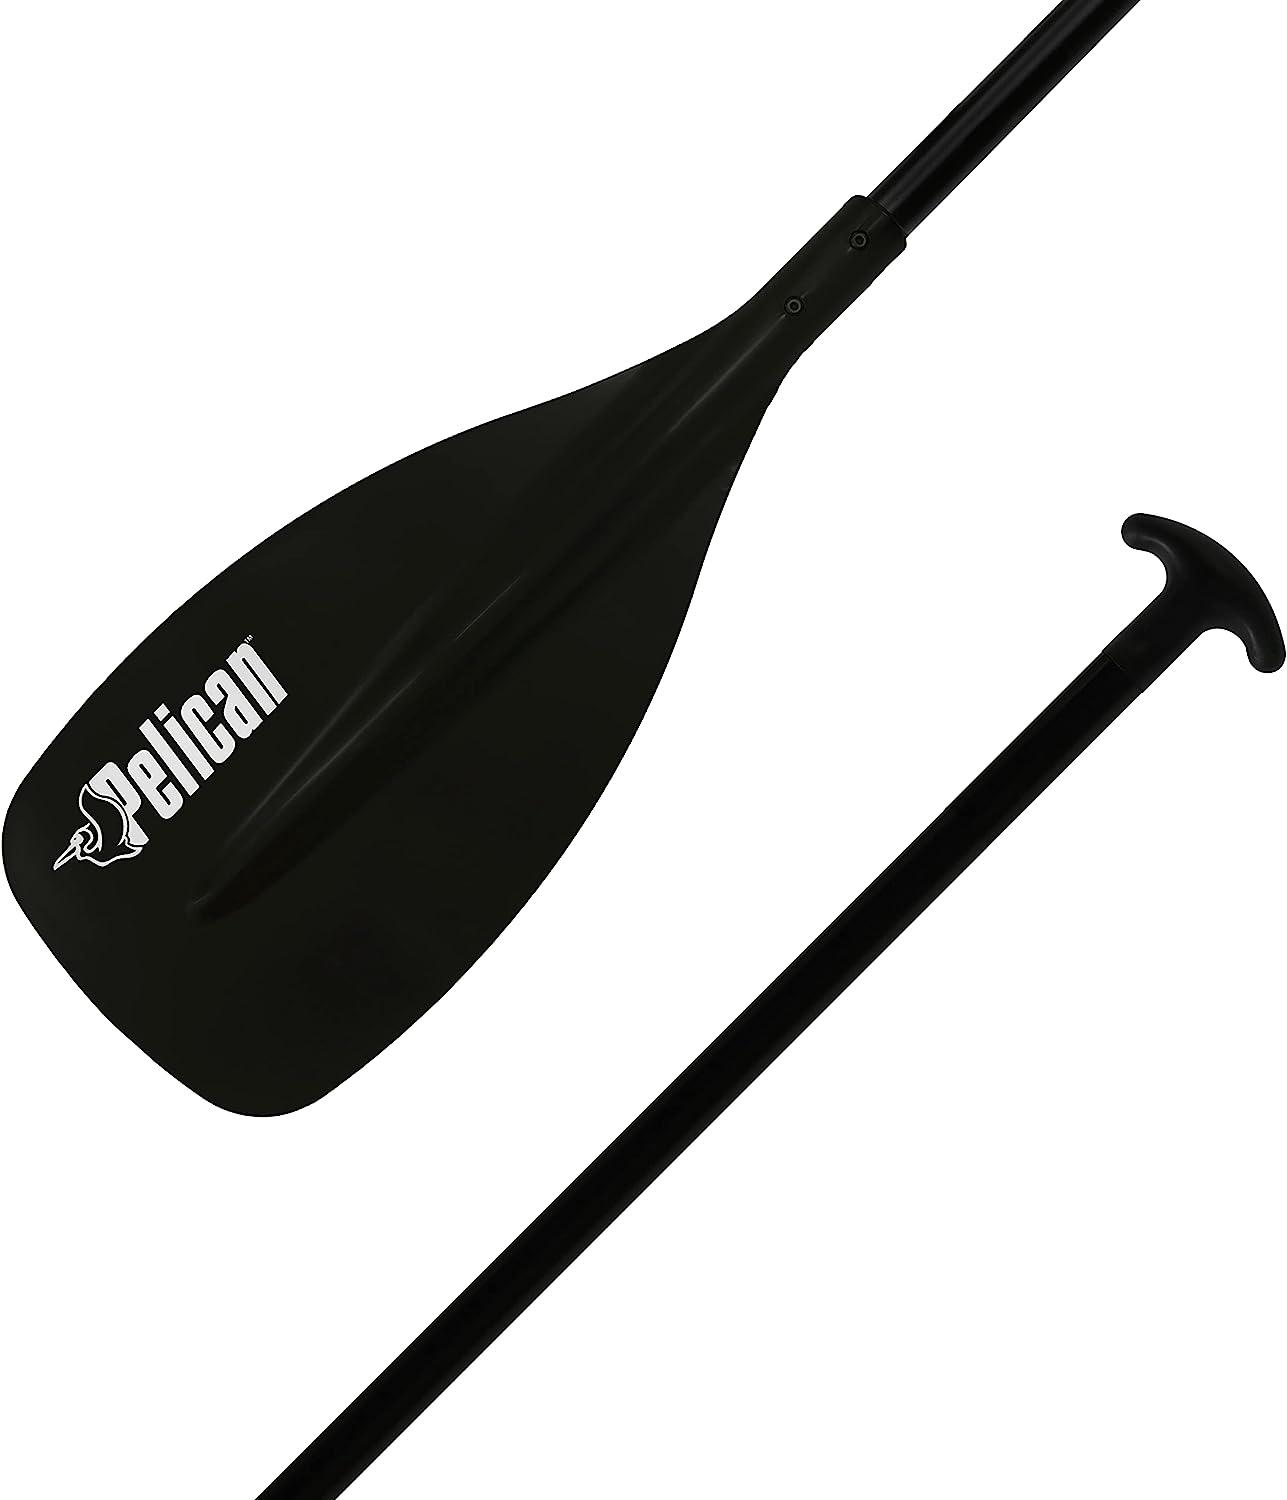 Pelican - Maelstrm Stand Up Lightweight Paddle Board Paddle - Adjustable  Height SUP Paddle, 191-201 cm - Sturdy & Ergonomic Black